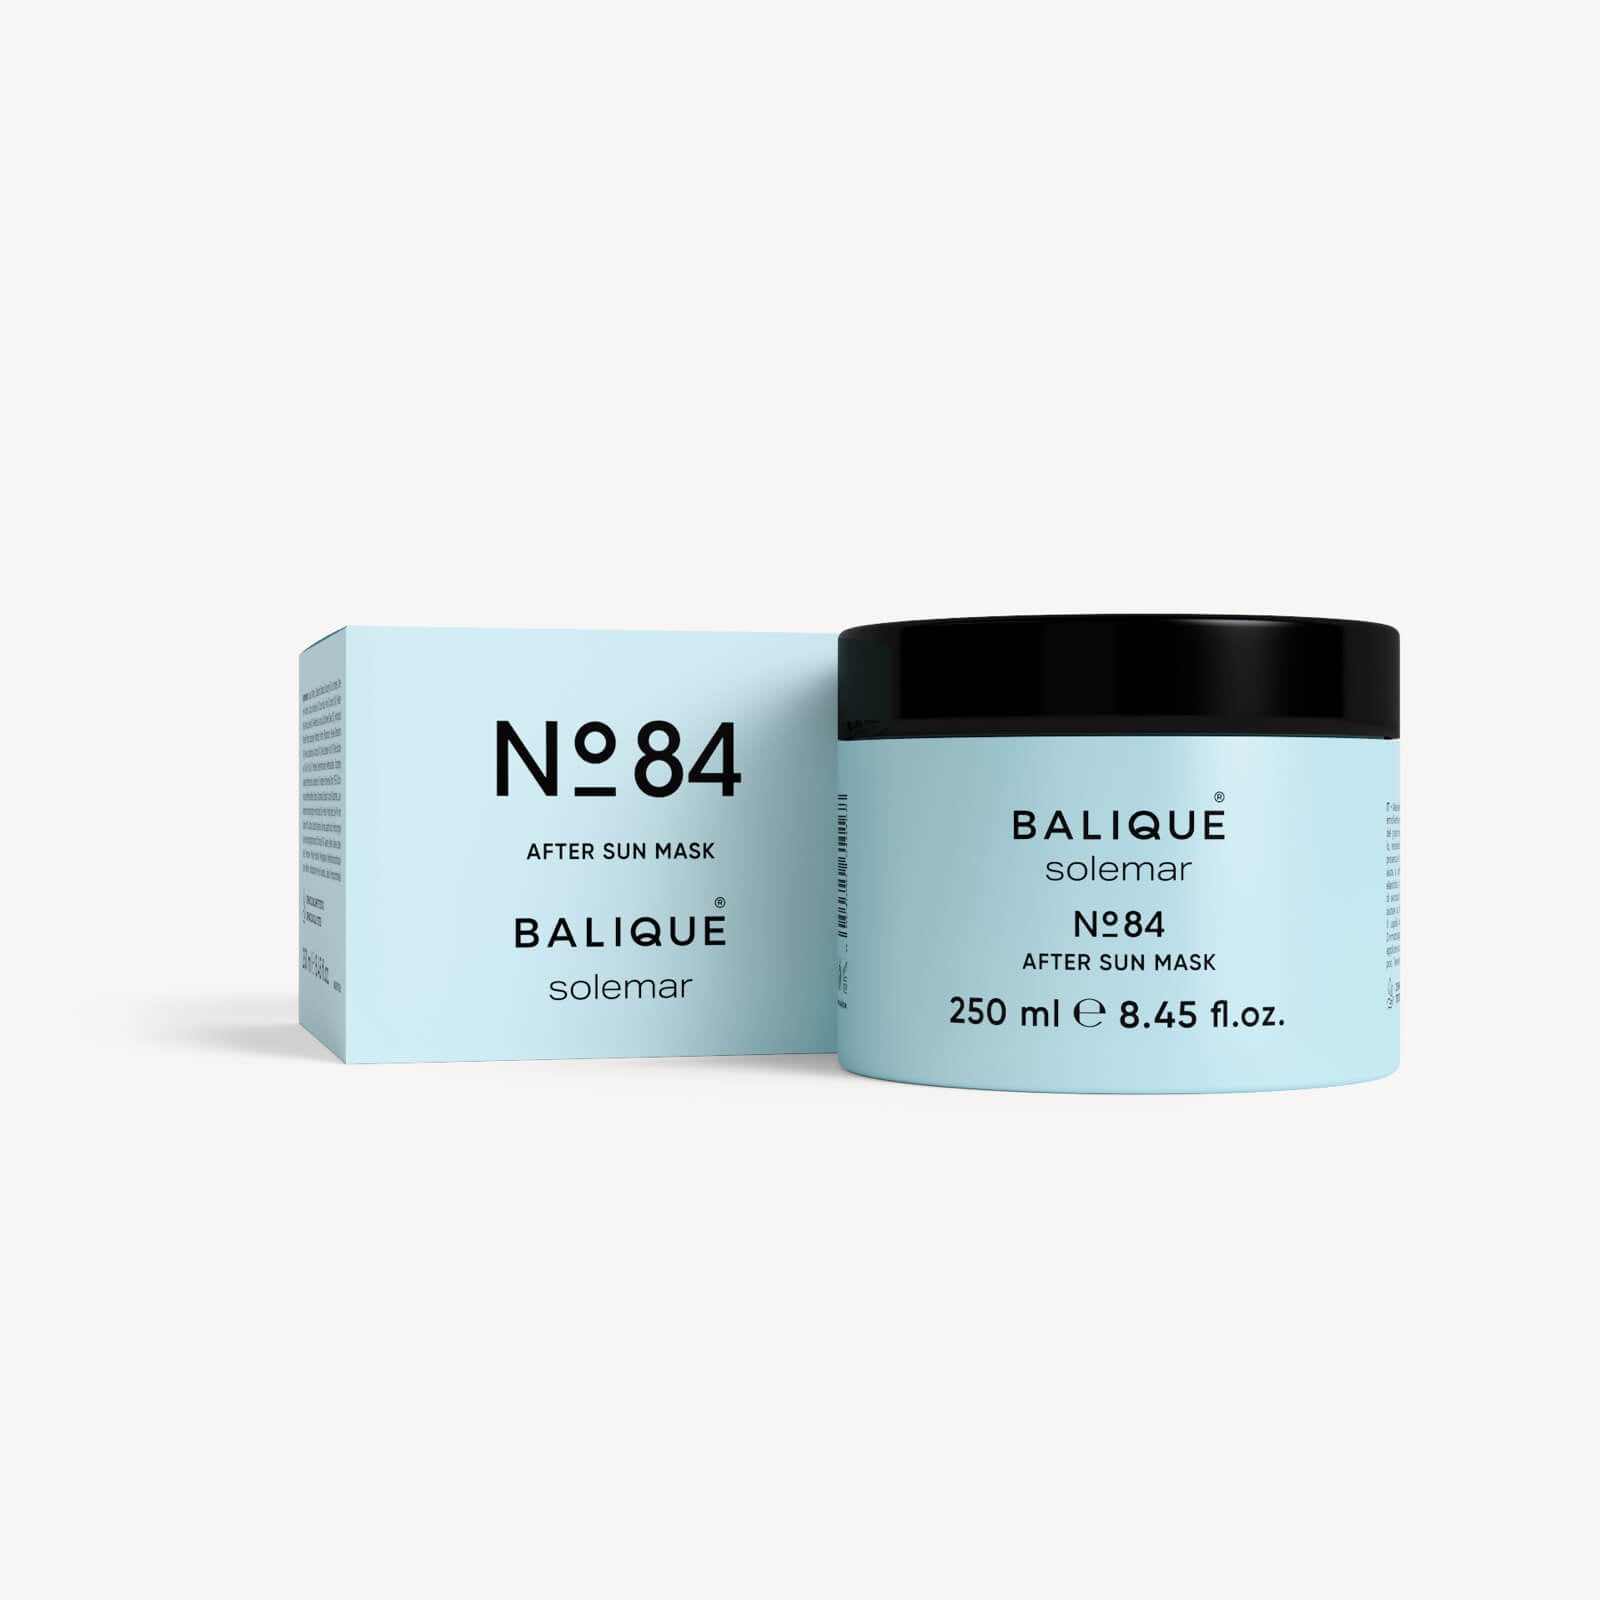 N°84 - AFTER SUN MASK